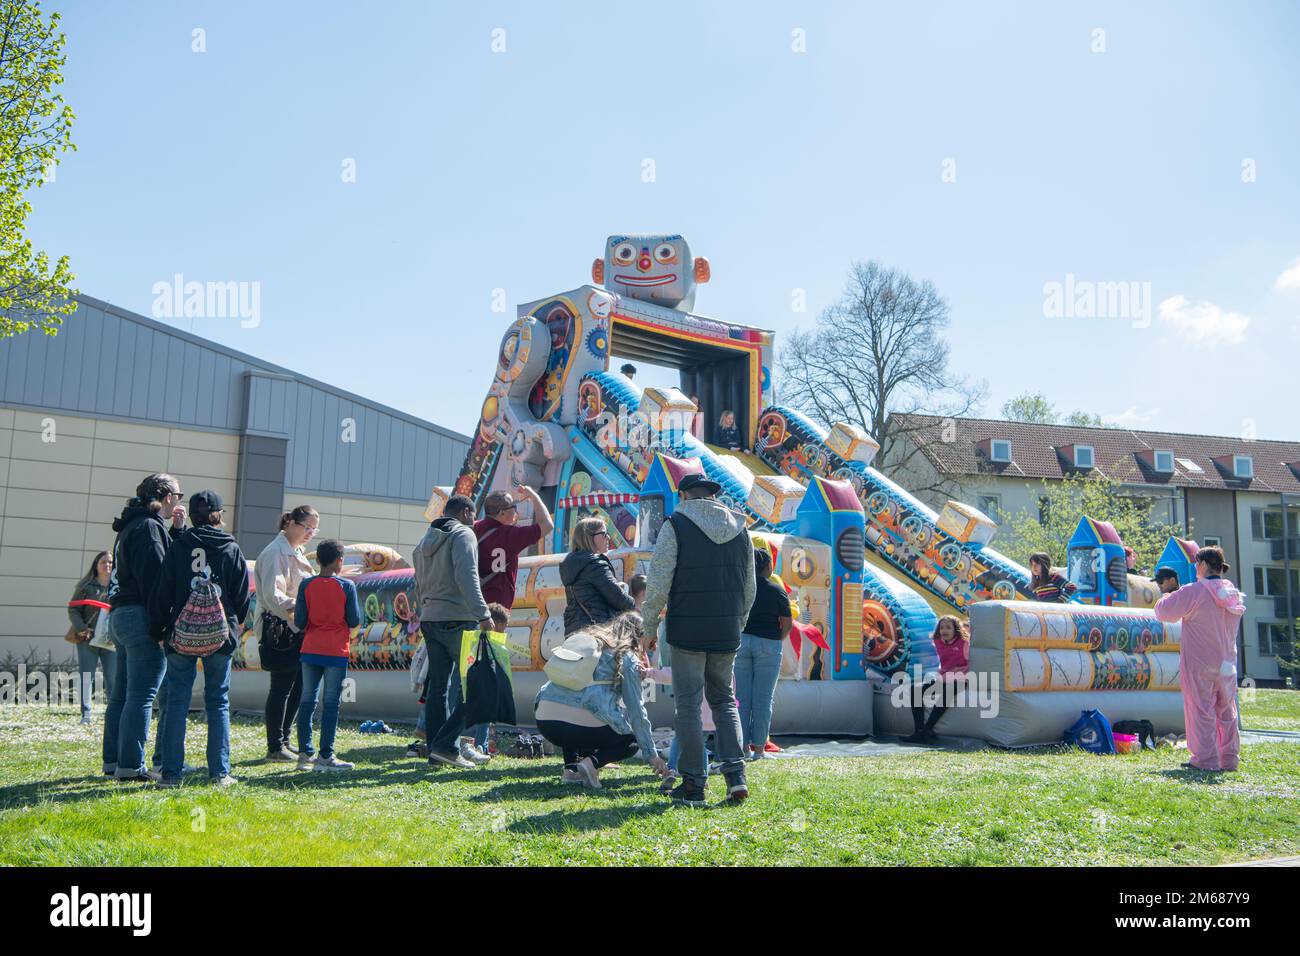 Wiesbaden parents and children stand in line for the inflatable slide at the Kinderfest event April 16, 2022, on Hainerberg Housing Area in Wiesbaden, Hessen, DE. The event featured a myriad of youth activities including face painting, bungy jumping, and carousel riding. Stock Photo